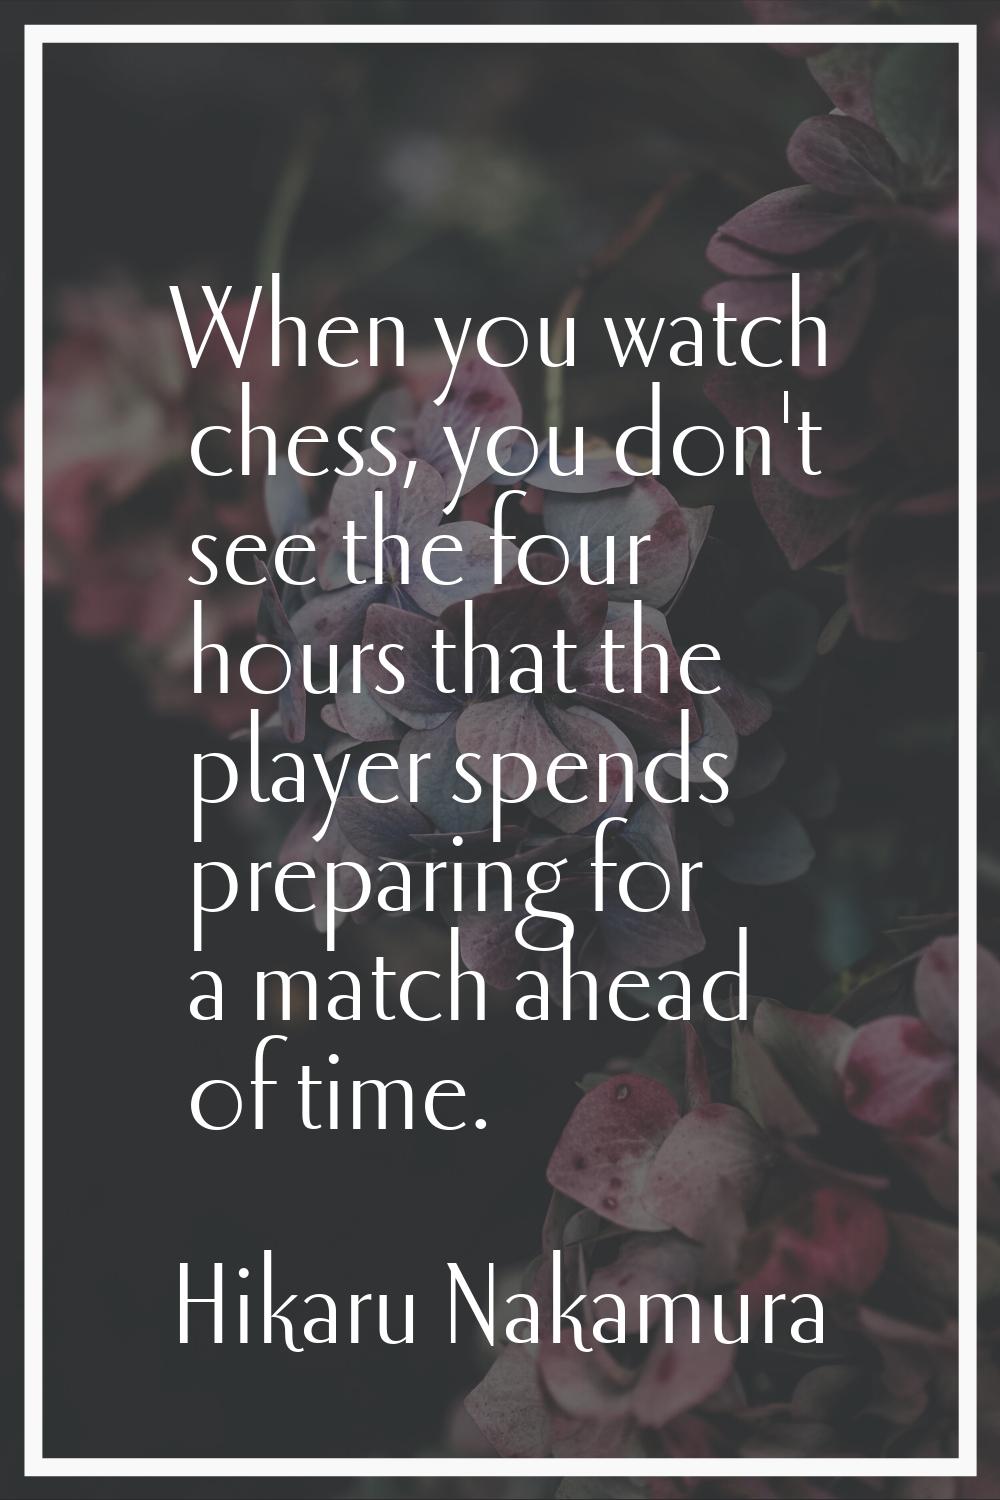 When you watch chess, you don't see the four hours that the player spends preparing for a match ahe